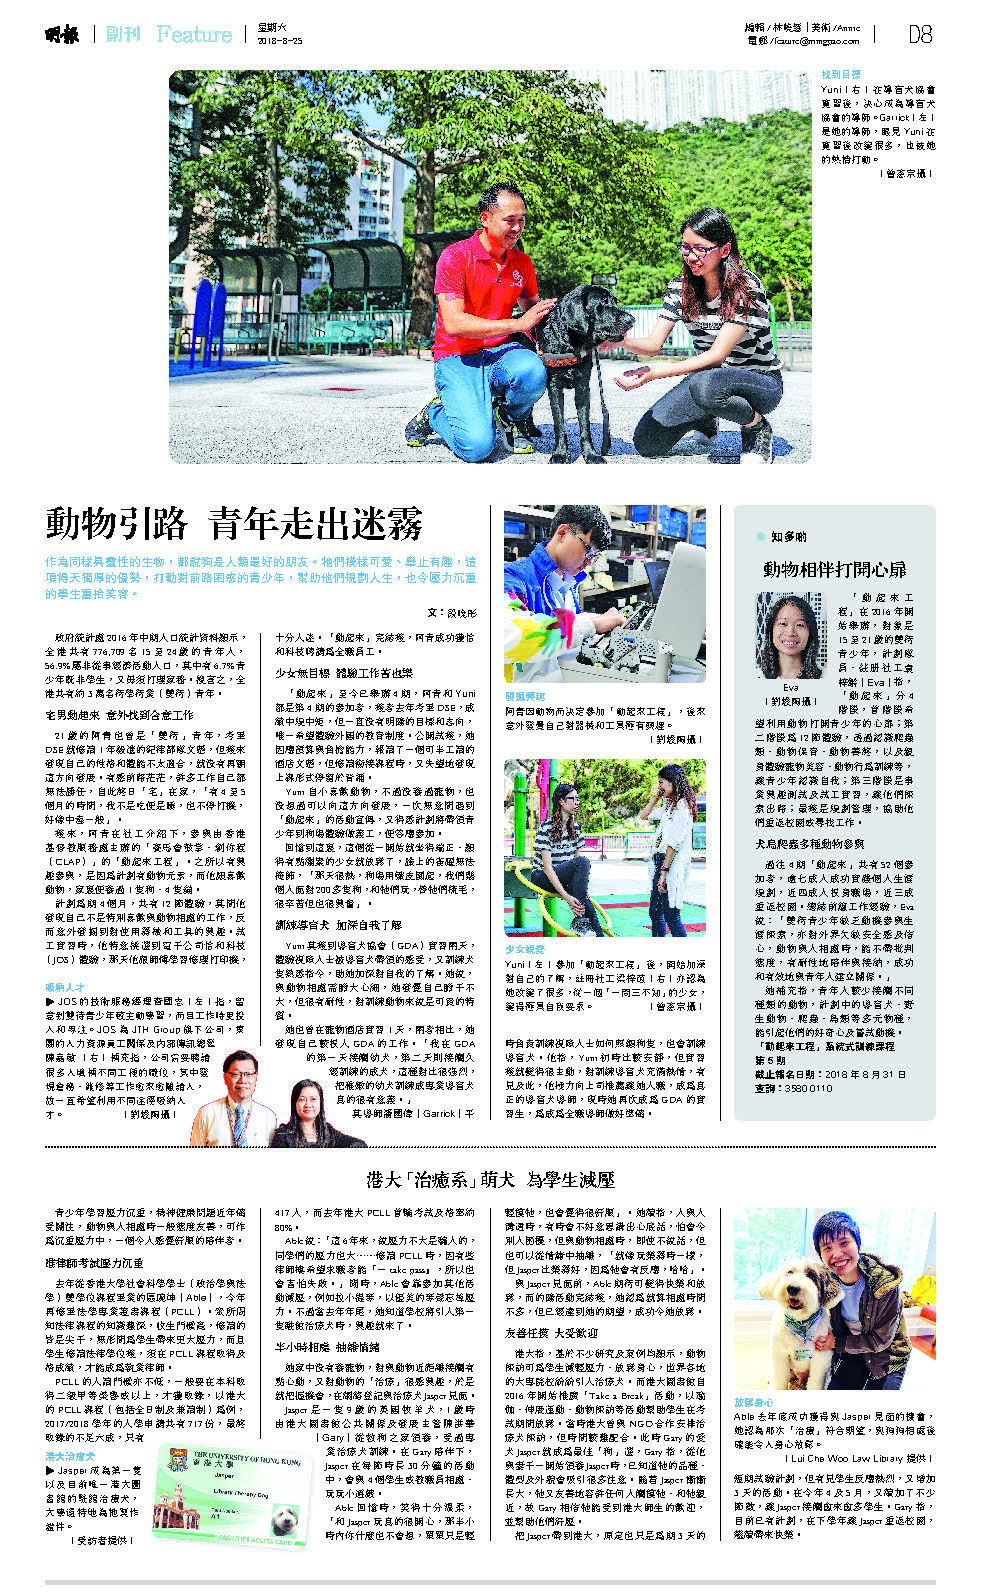 20180825 - Ming Pao Article